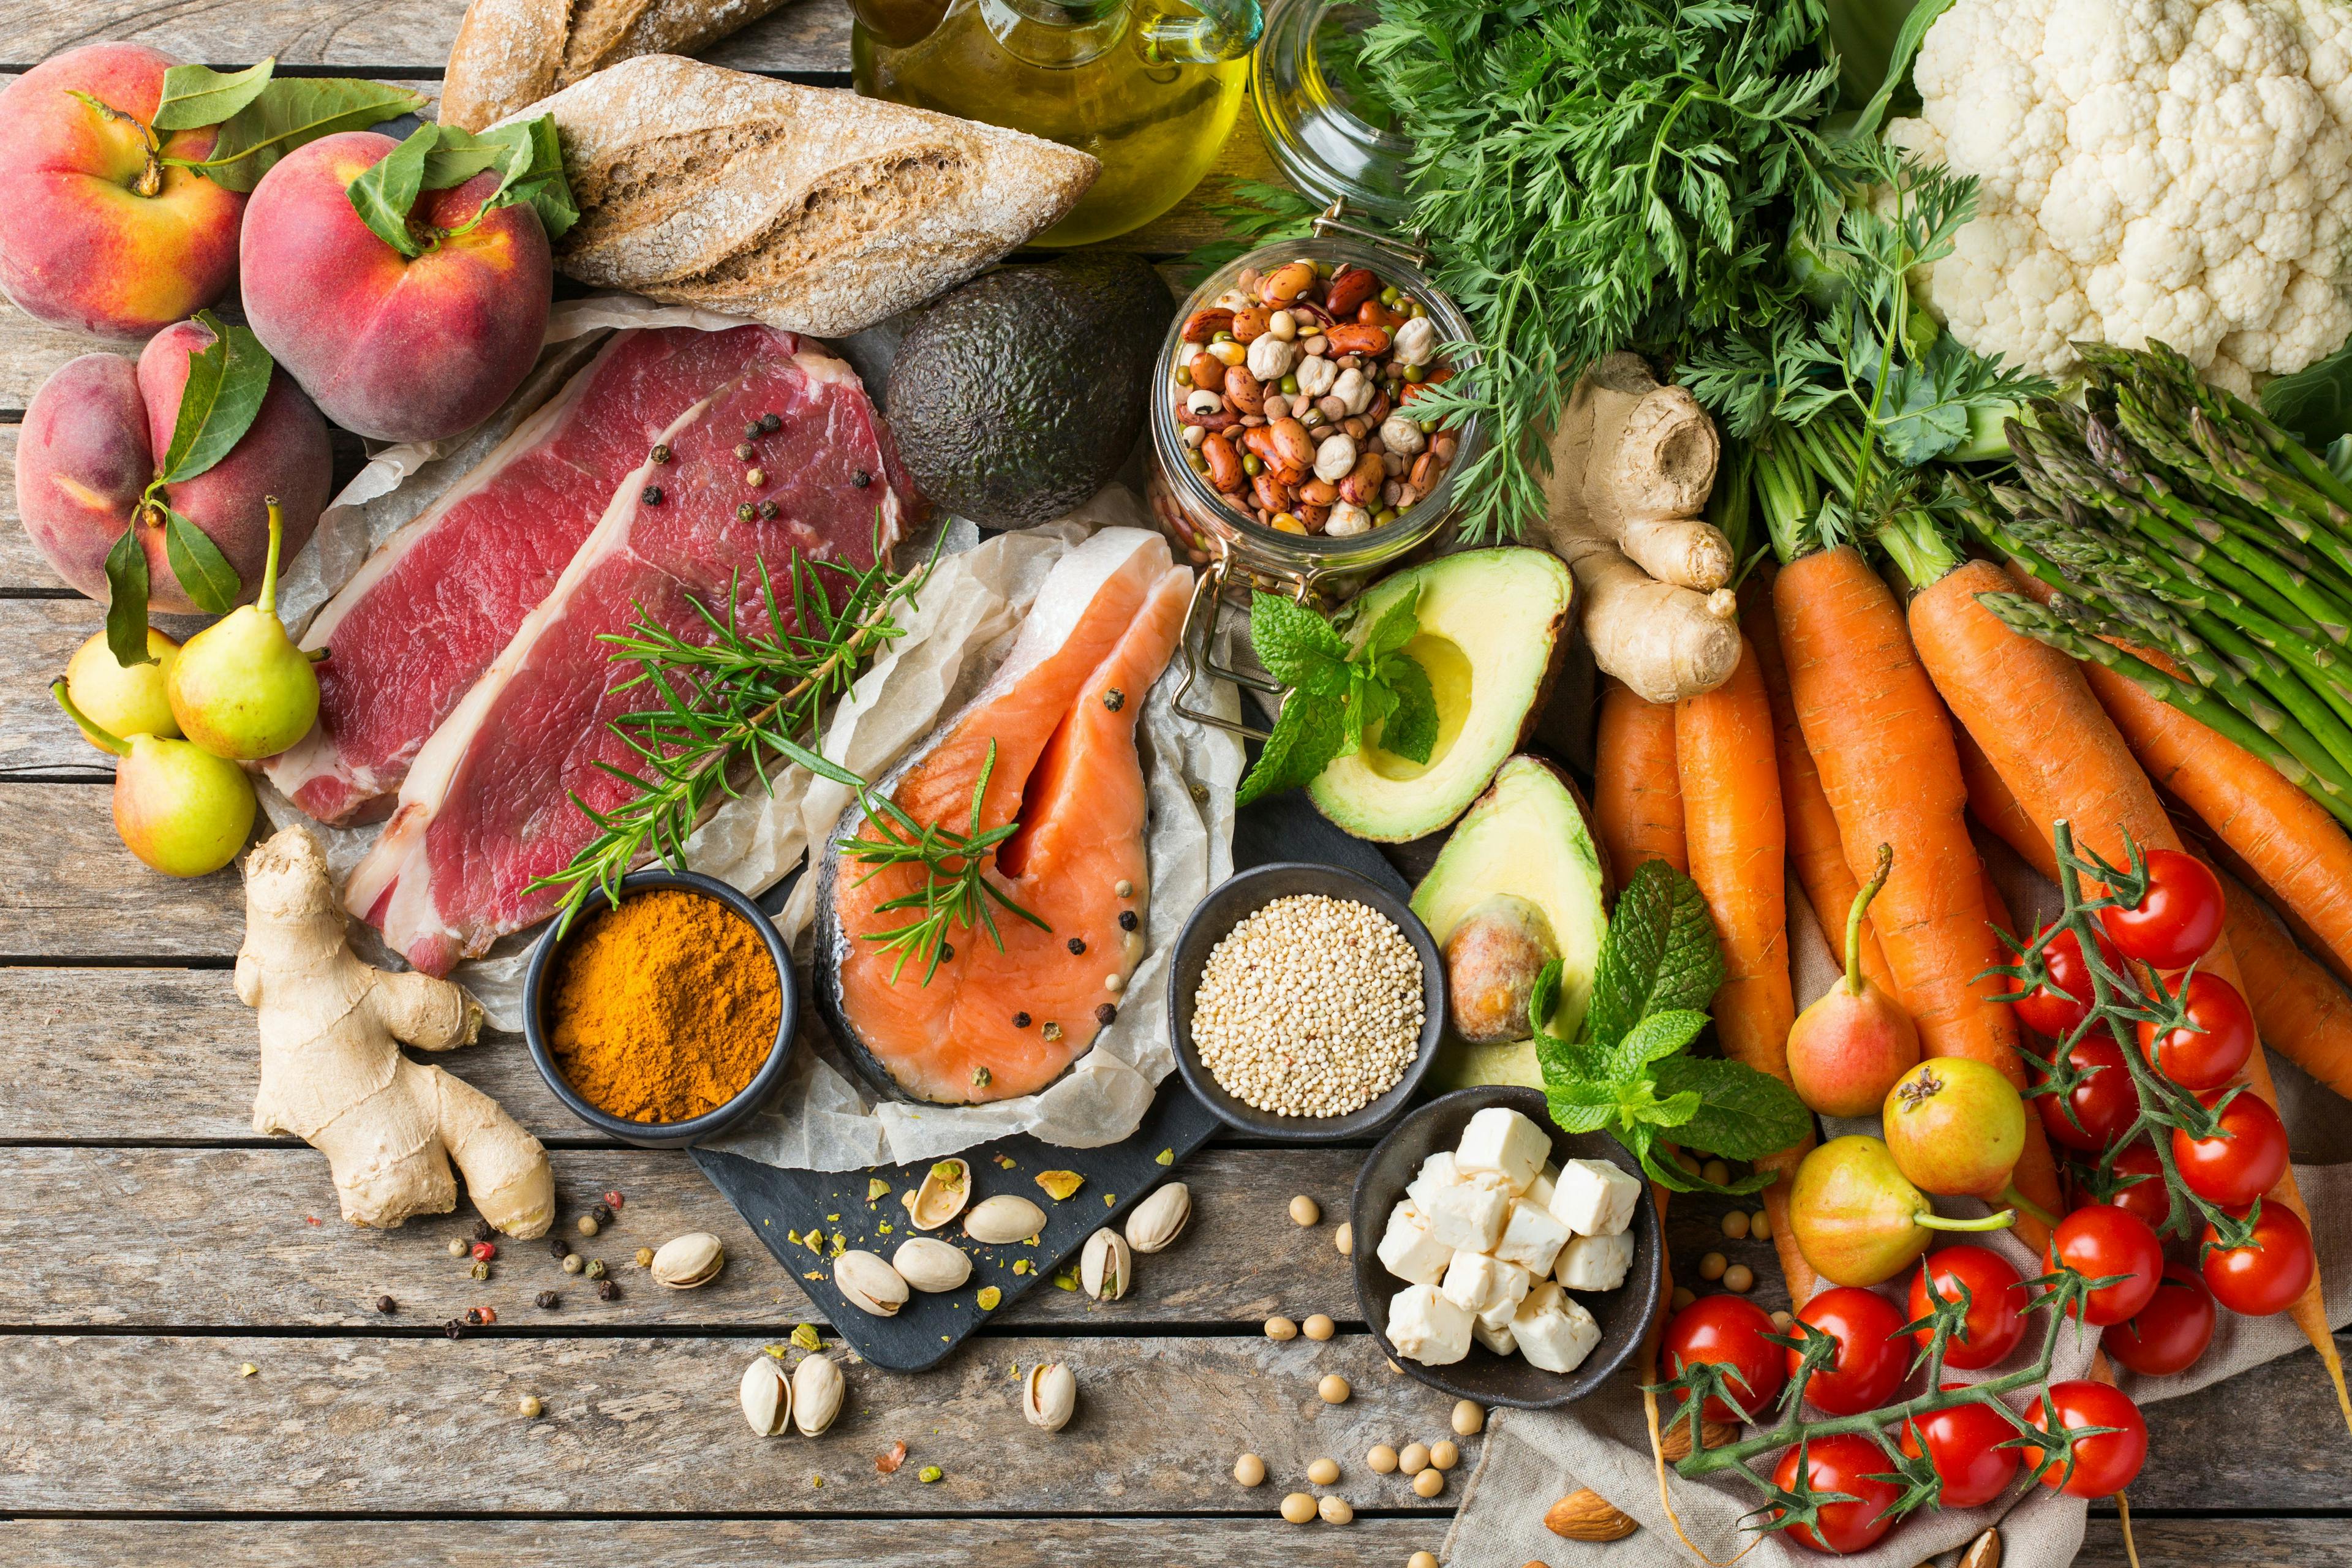 Adherence to Mediterranean Diet Associated with Lower Rate of T2D in Women